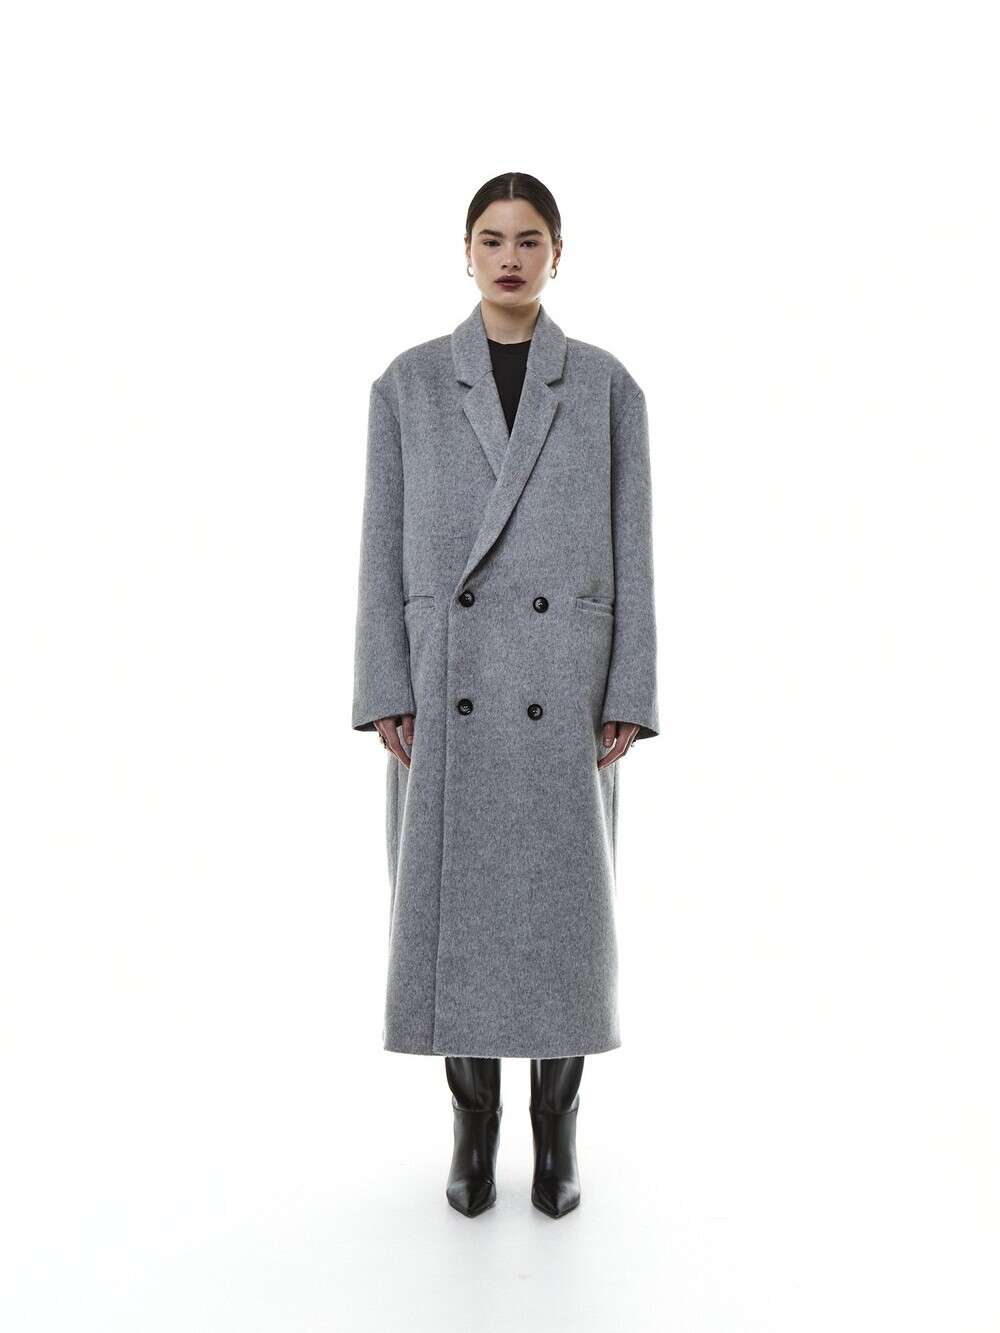 Gray insulated coat with leaf